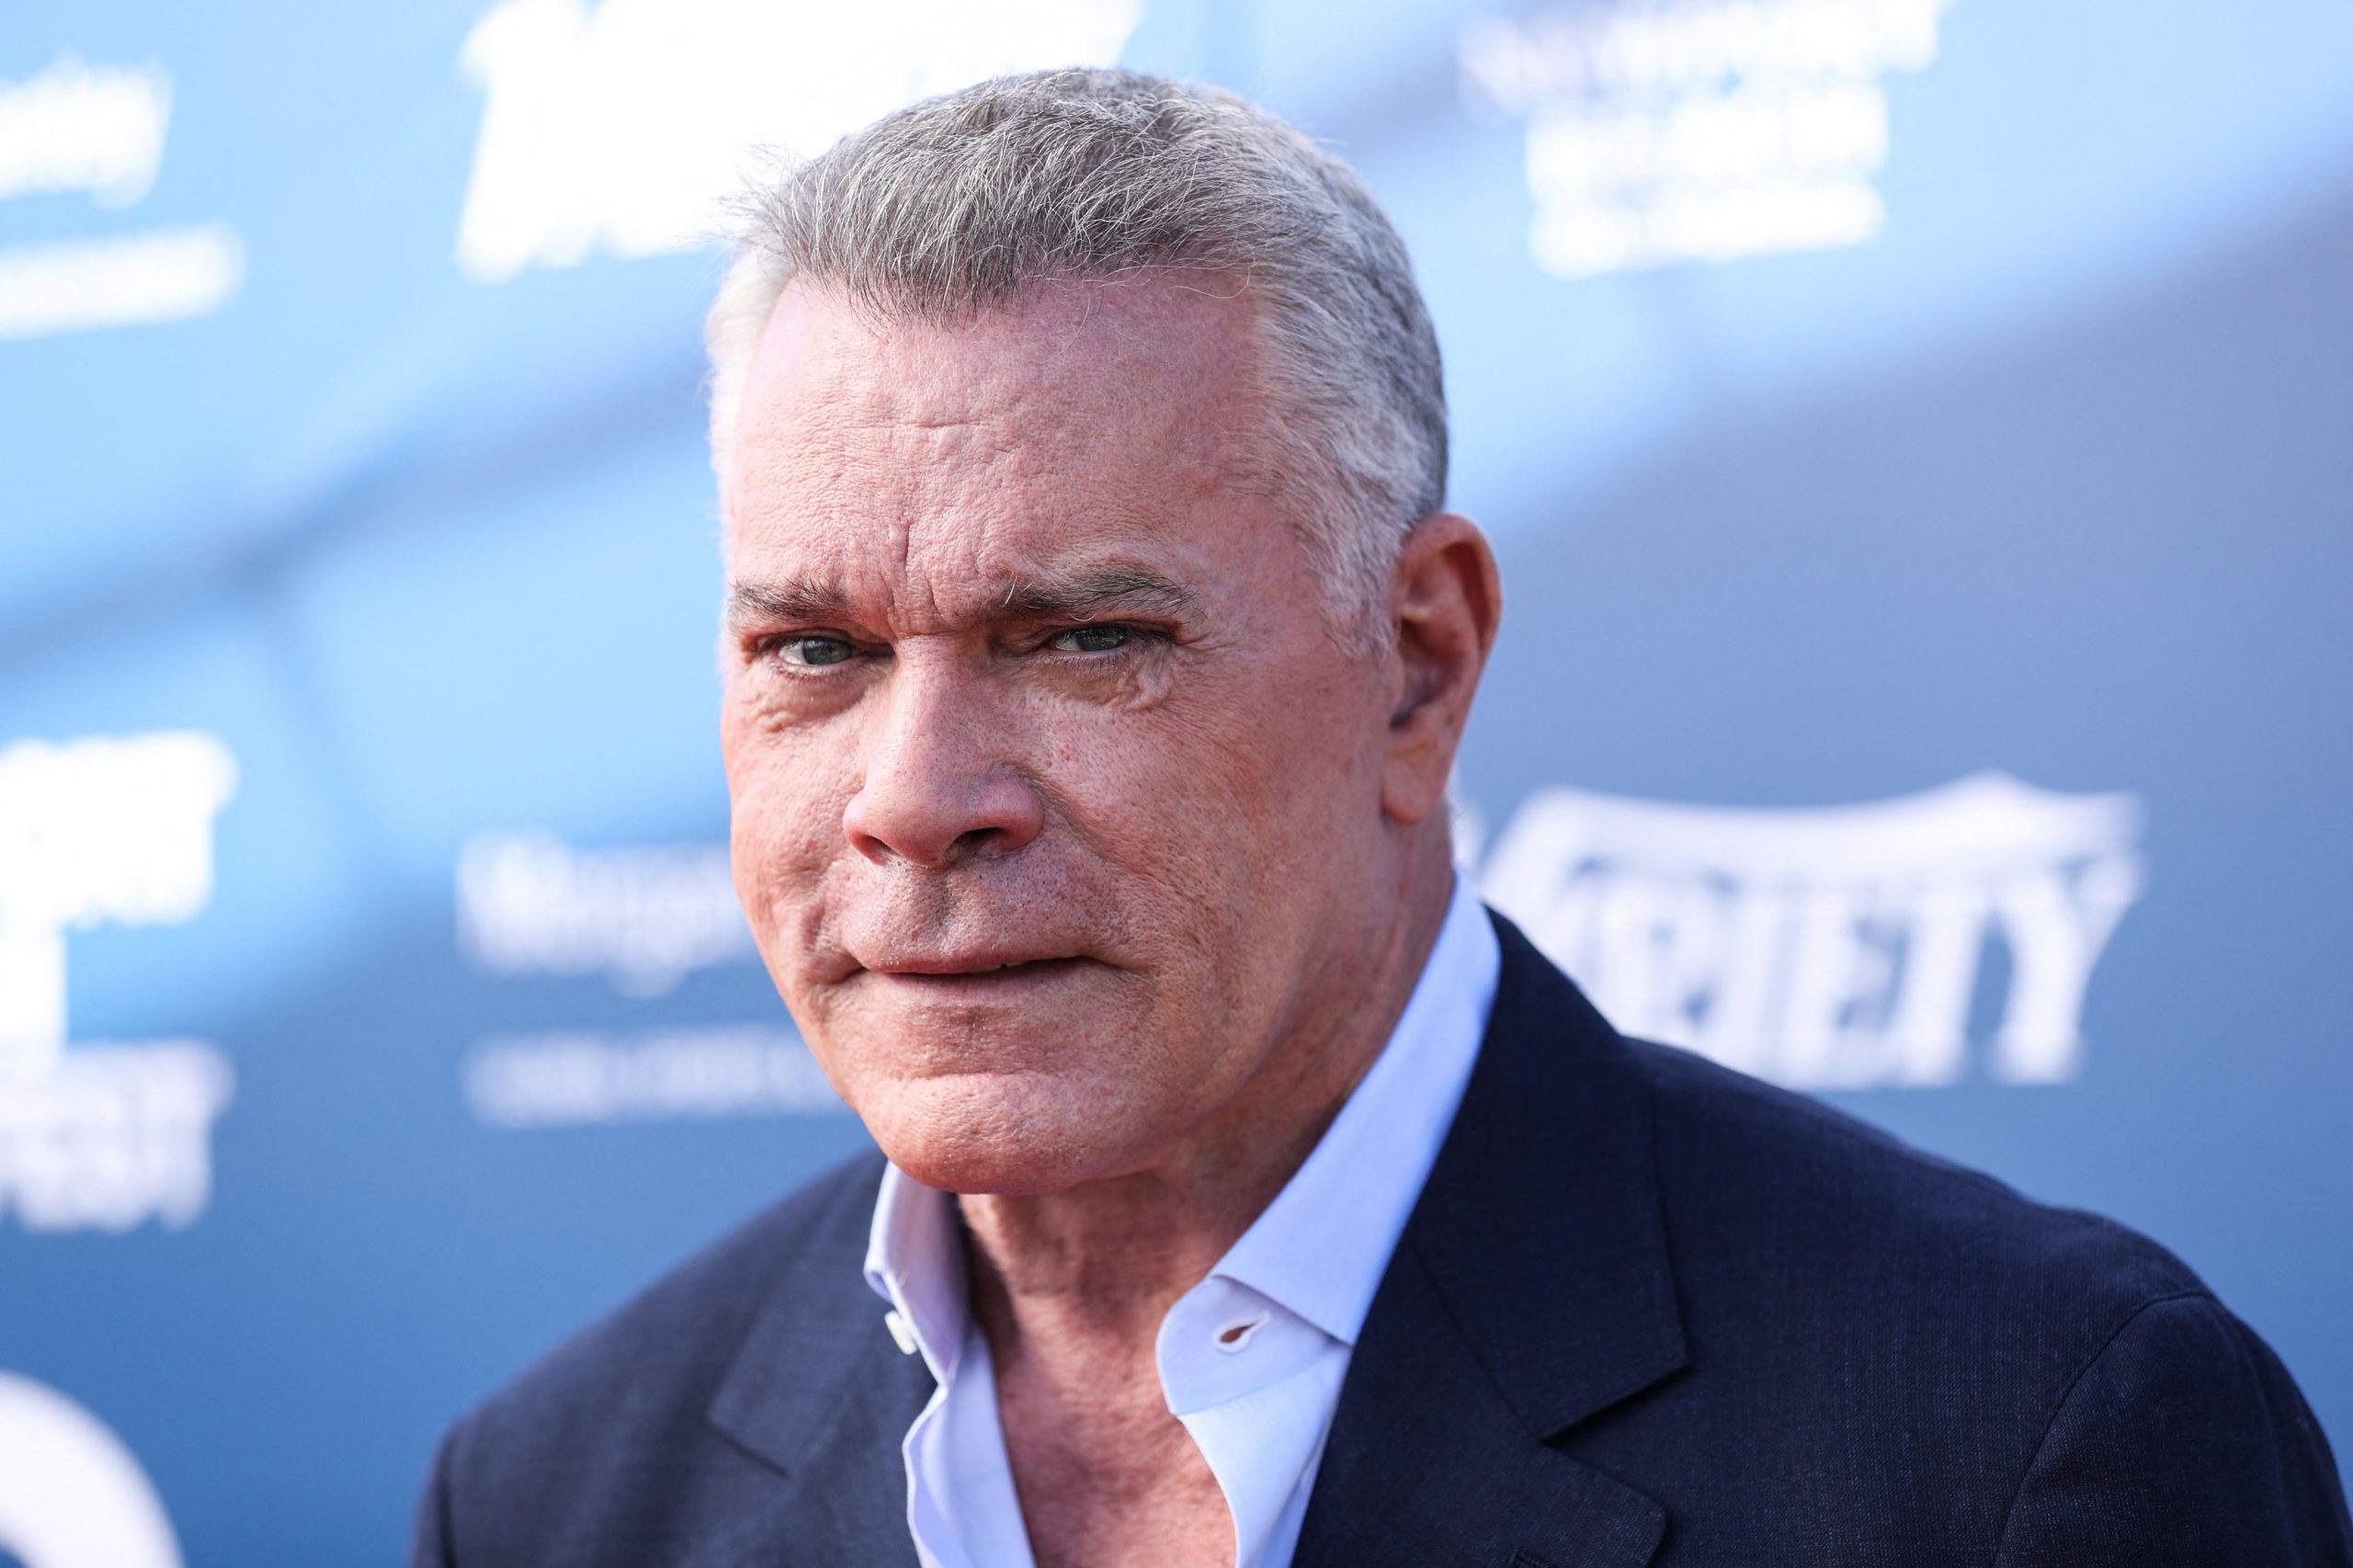 Field of Dreams with Ray Liotta 